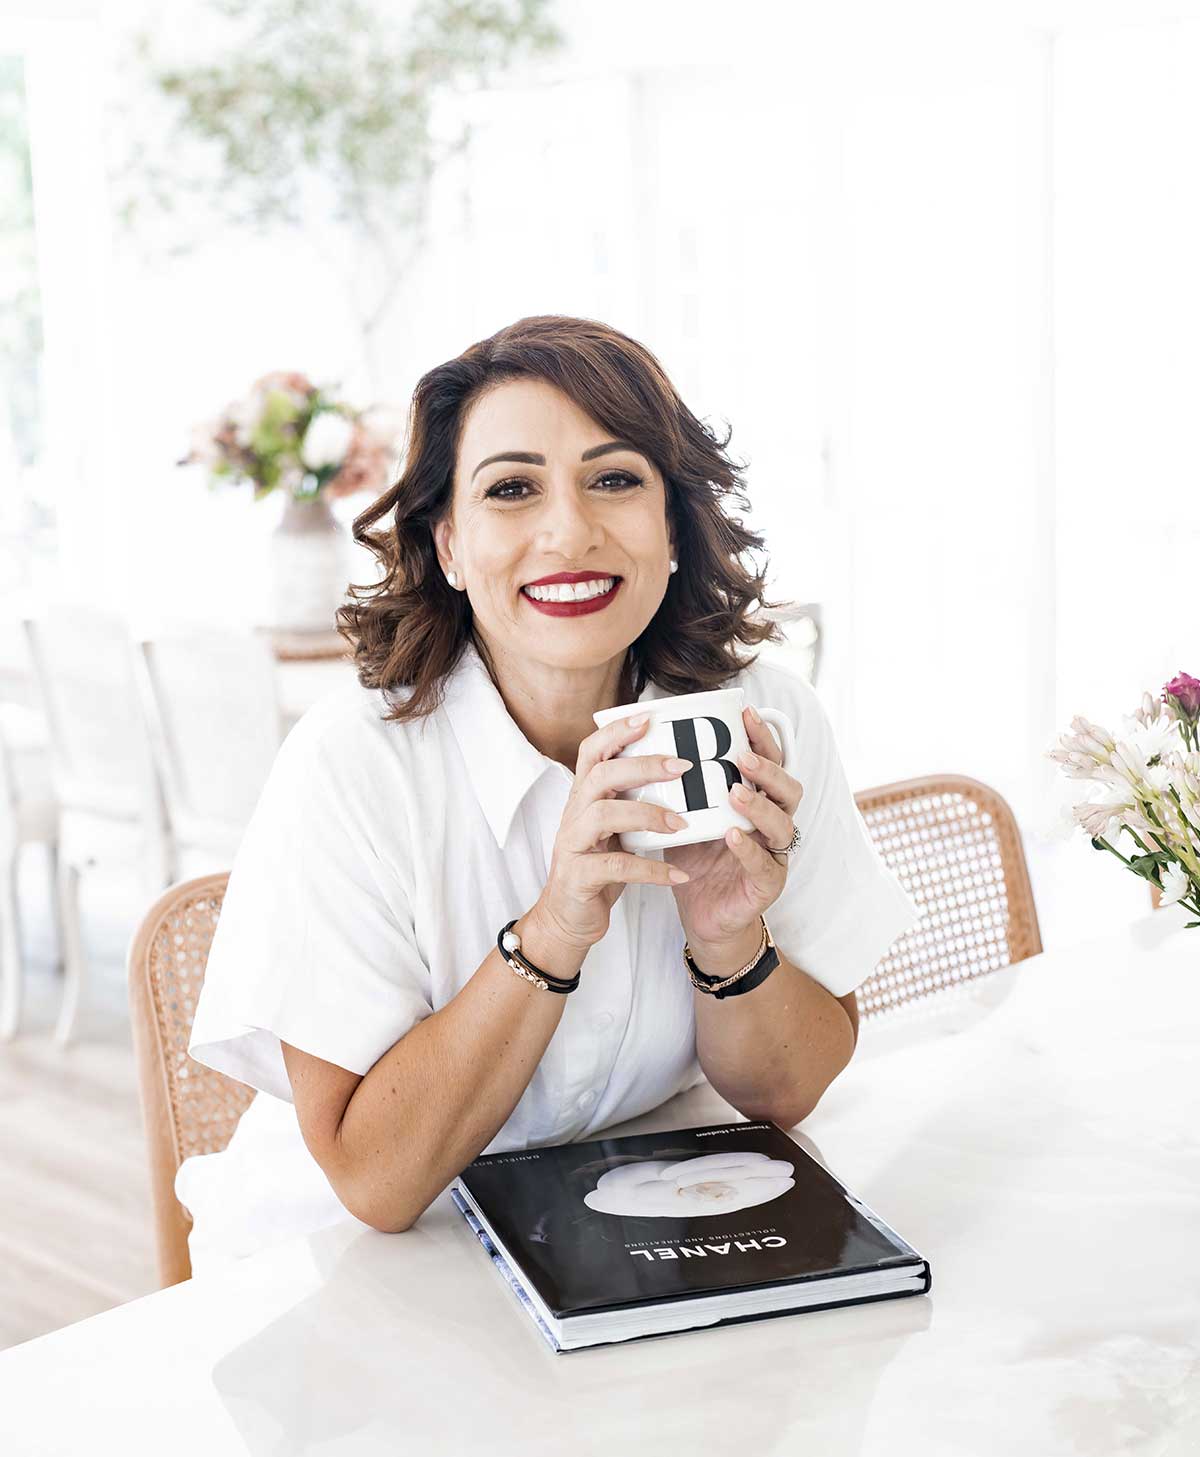 The Perth Fashion Stylist Rosalinda Panton sitting at kitchen table holding a cup of tea